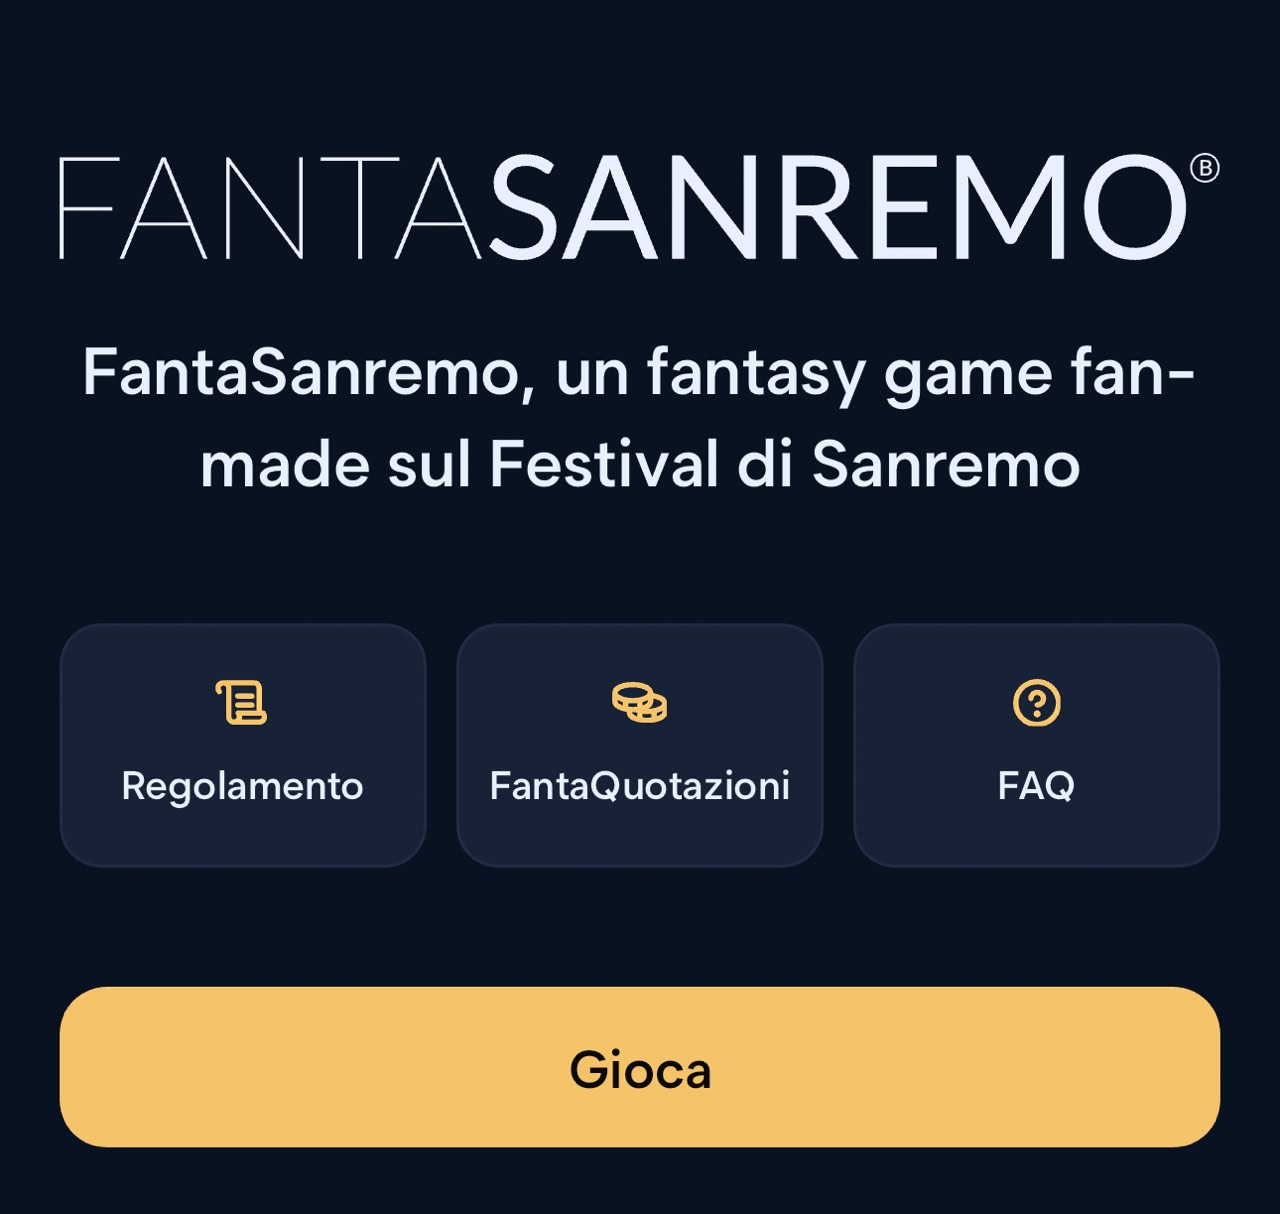 FantaSanremo: How does the most downloaded app currently work?